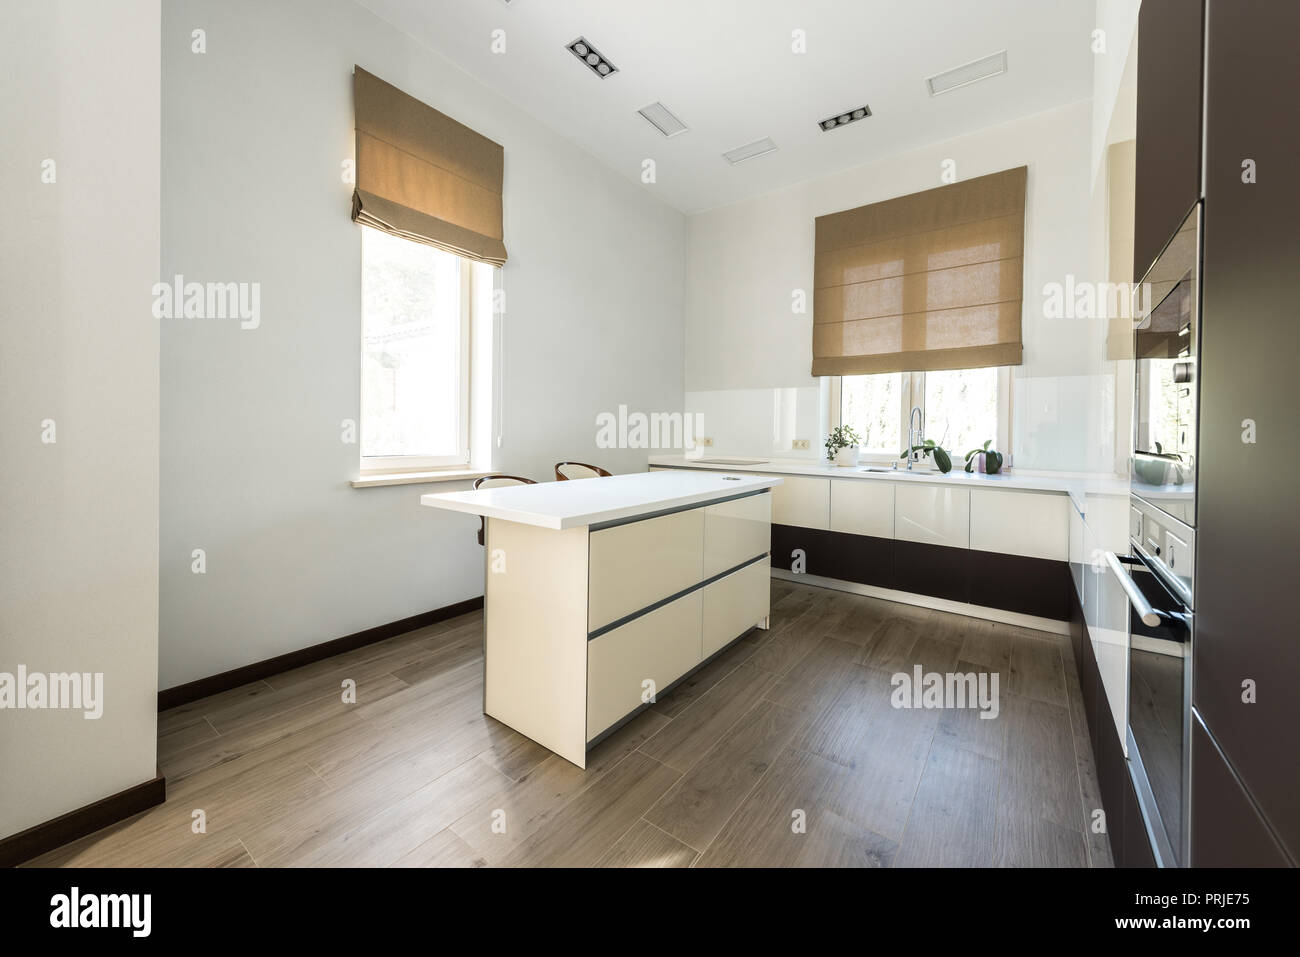 interior view of empty modern kitchen with furniture in light colors Stock Photo